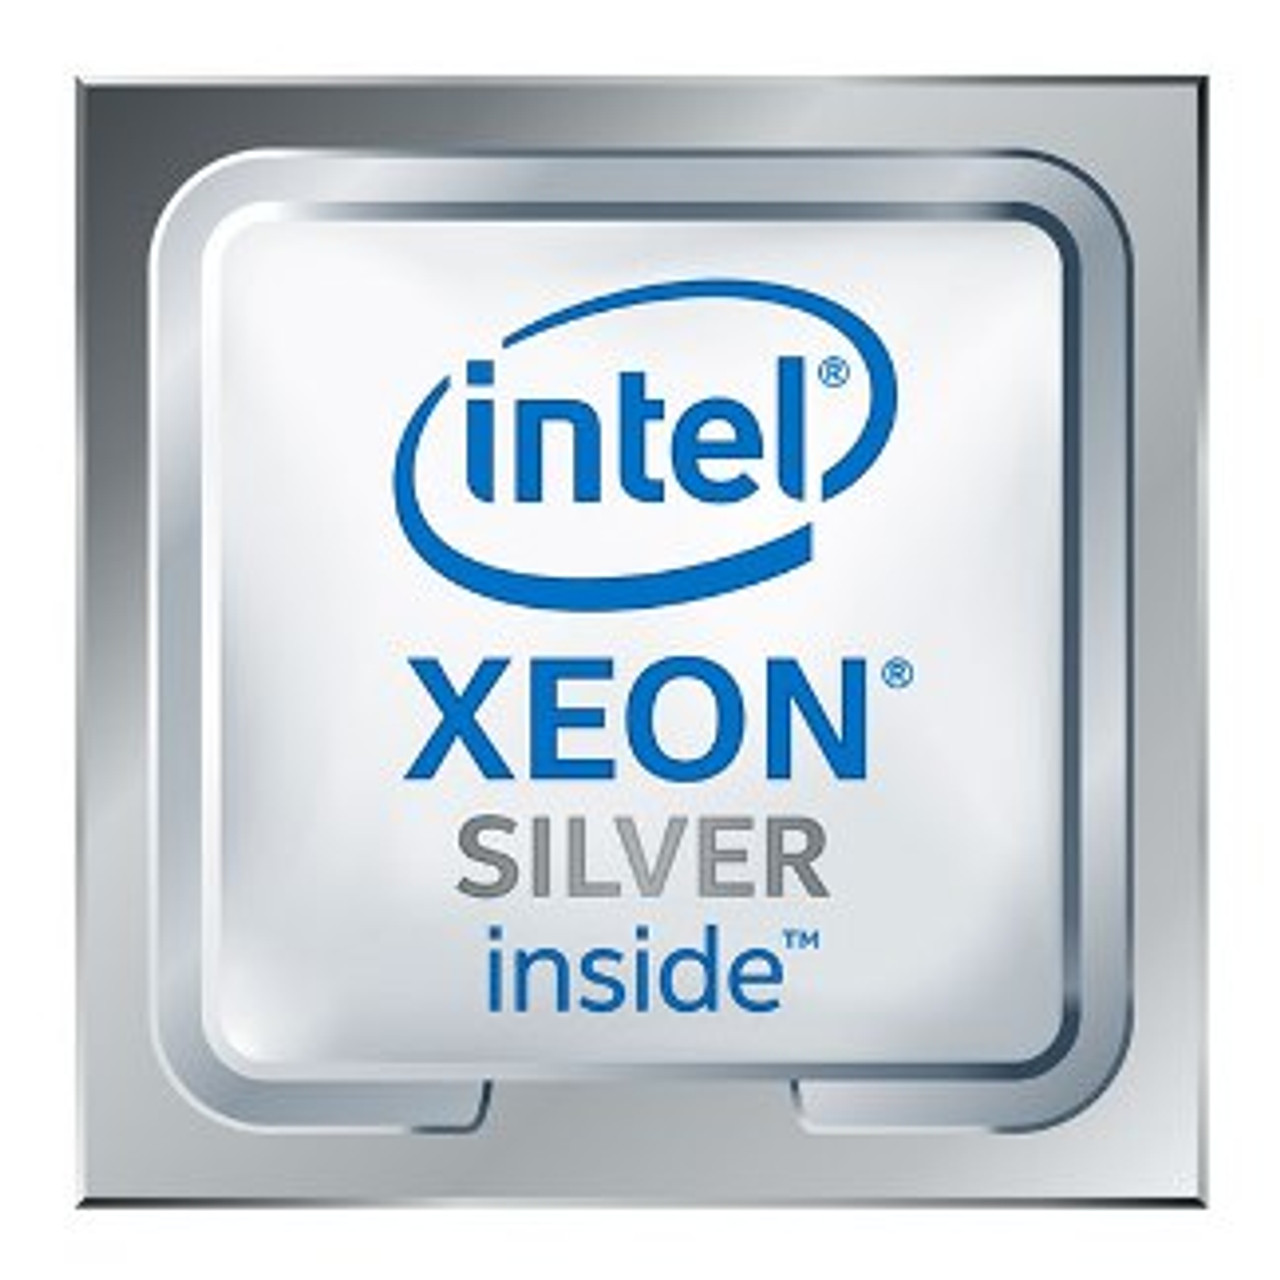 INTEL BX806954210R Xeon (2nd Gen) 10-core Silver 4210r 2.4ghz 13.75mb Cache 9.6gt/s Upi Speed Socket Fclga3647 14nm 100w Processor Only